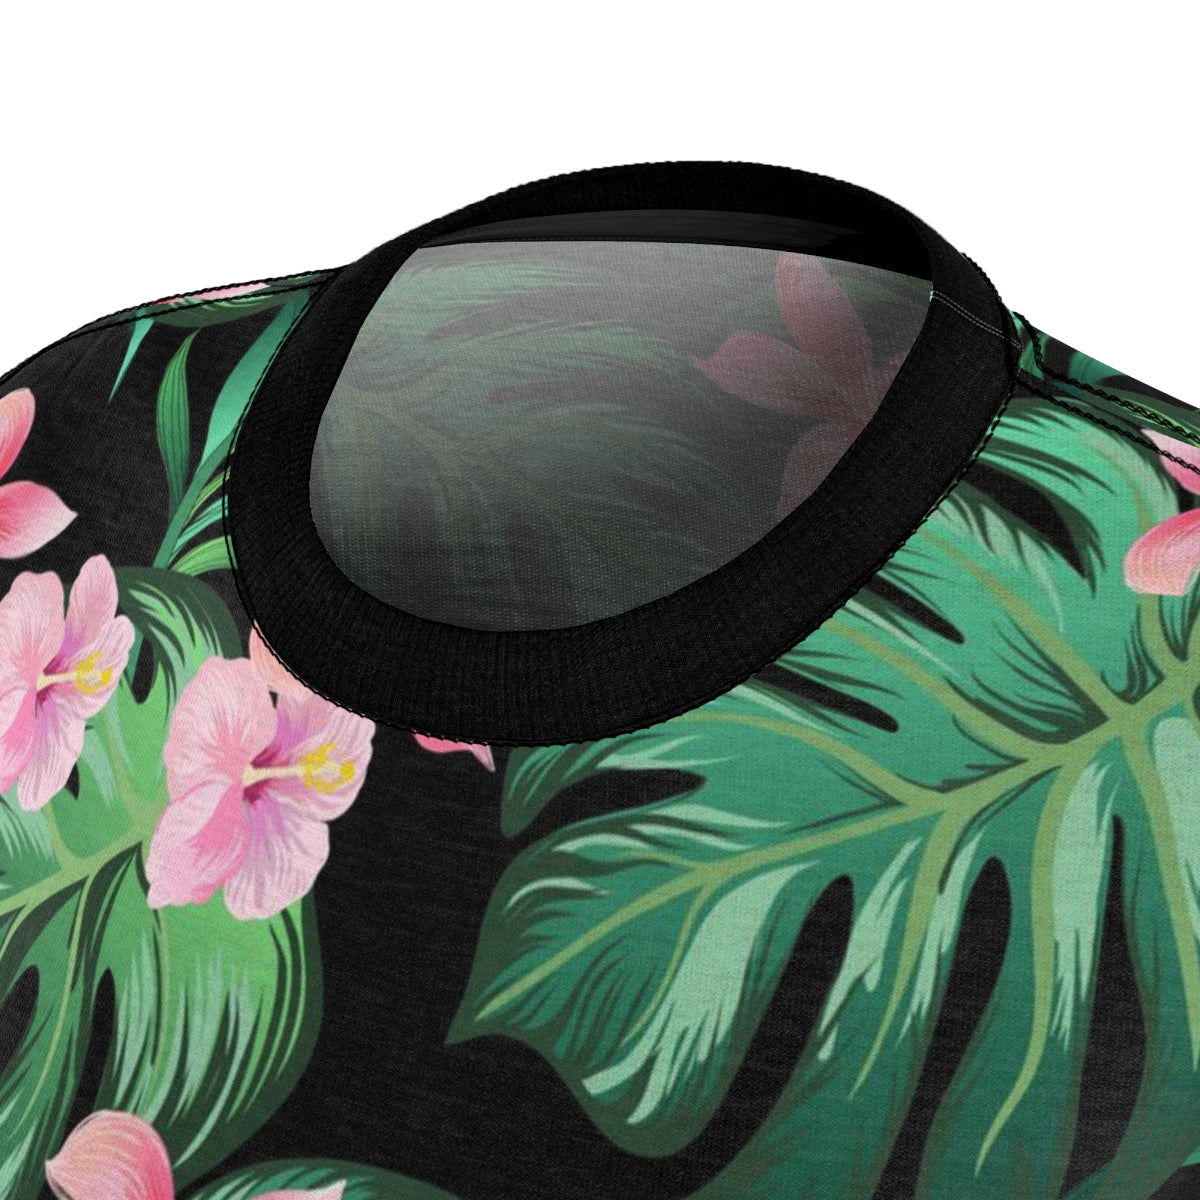 Summer Palm Leaves And Flowers Women's Tee